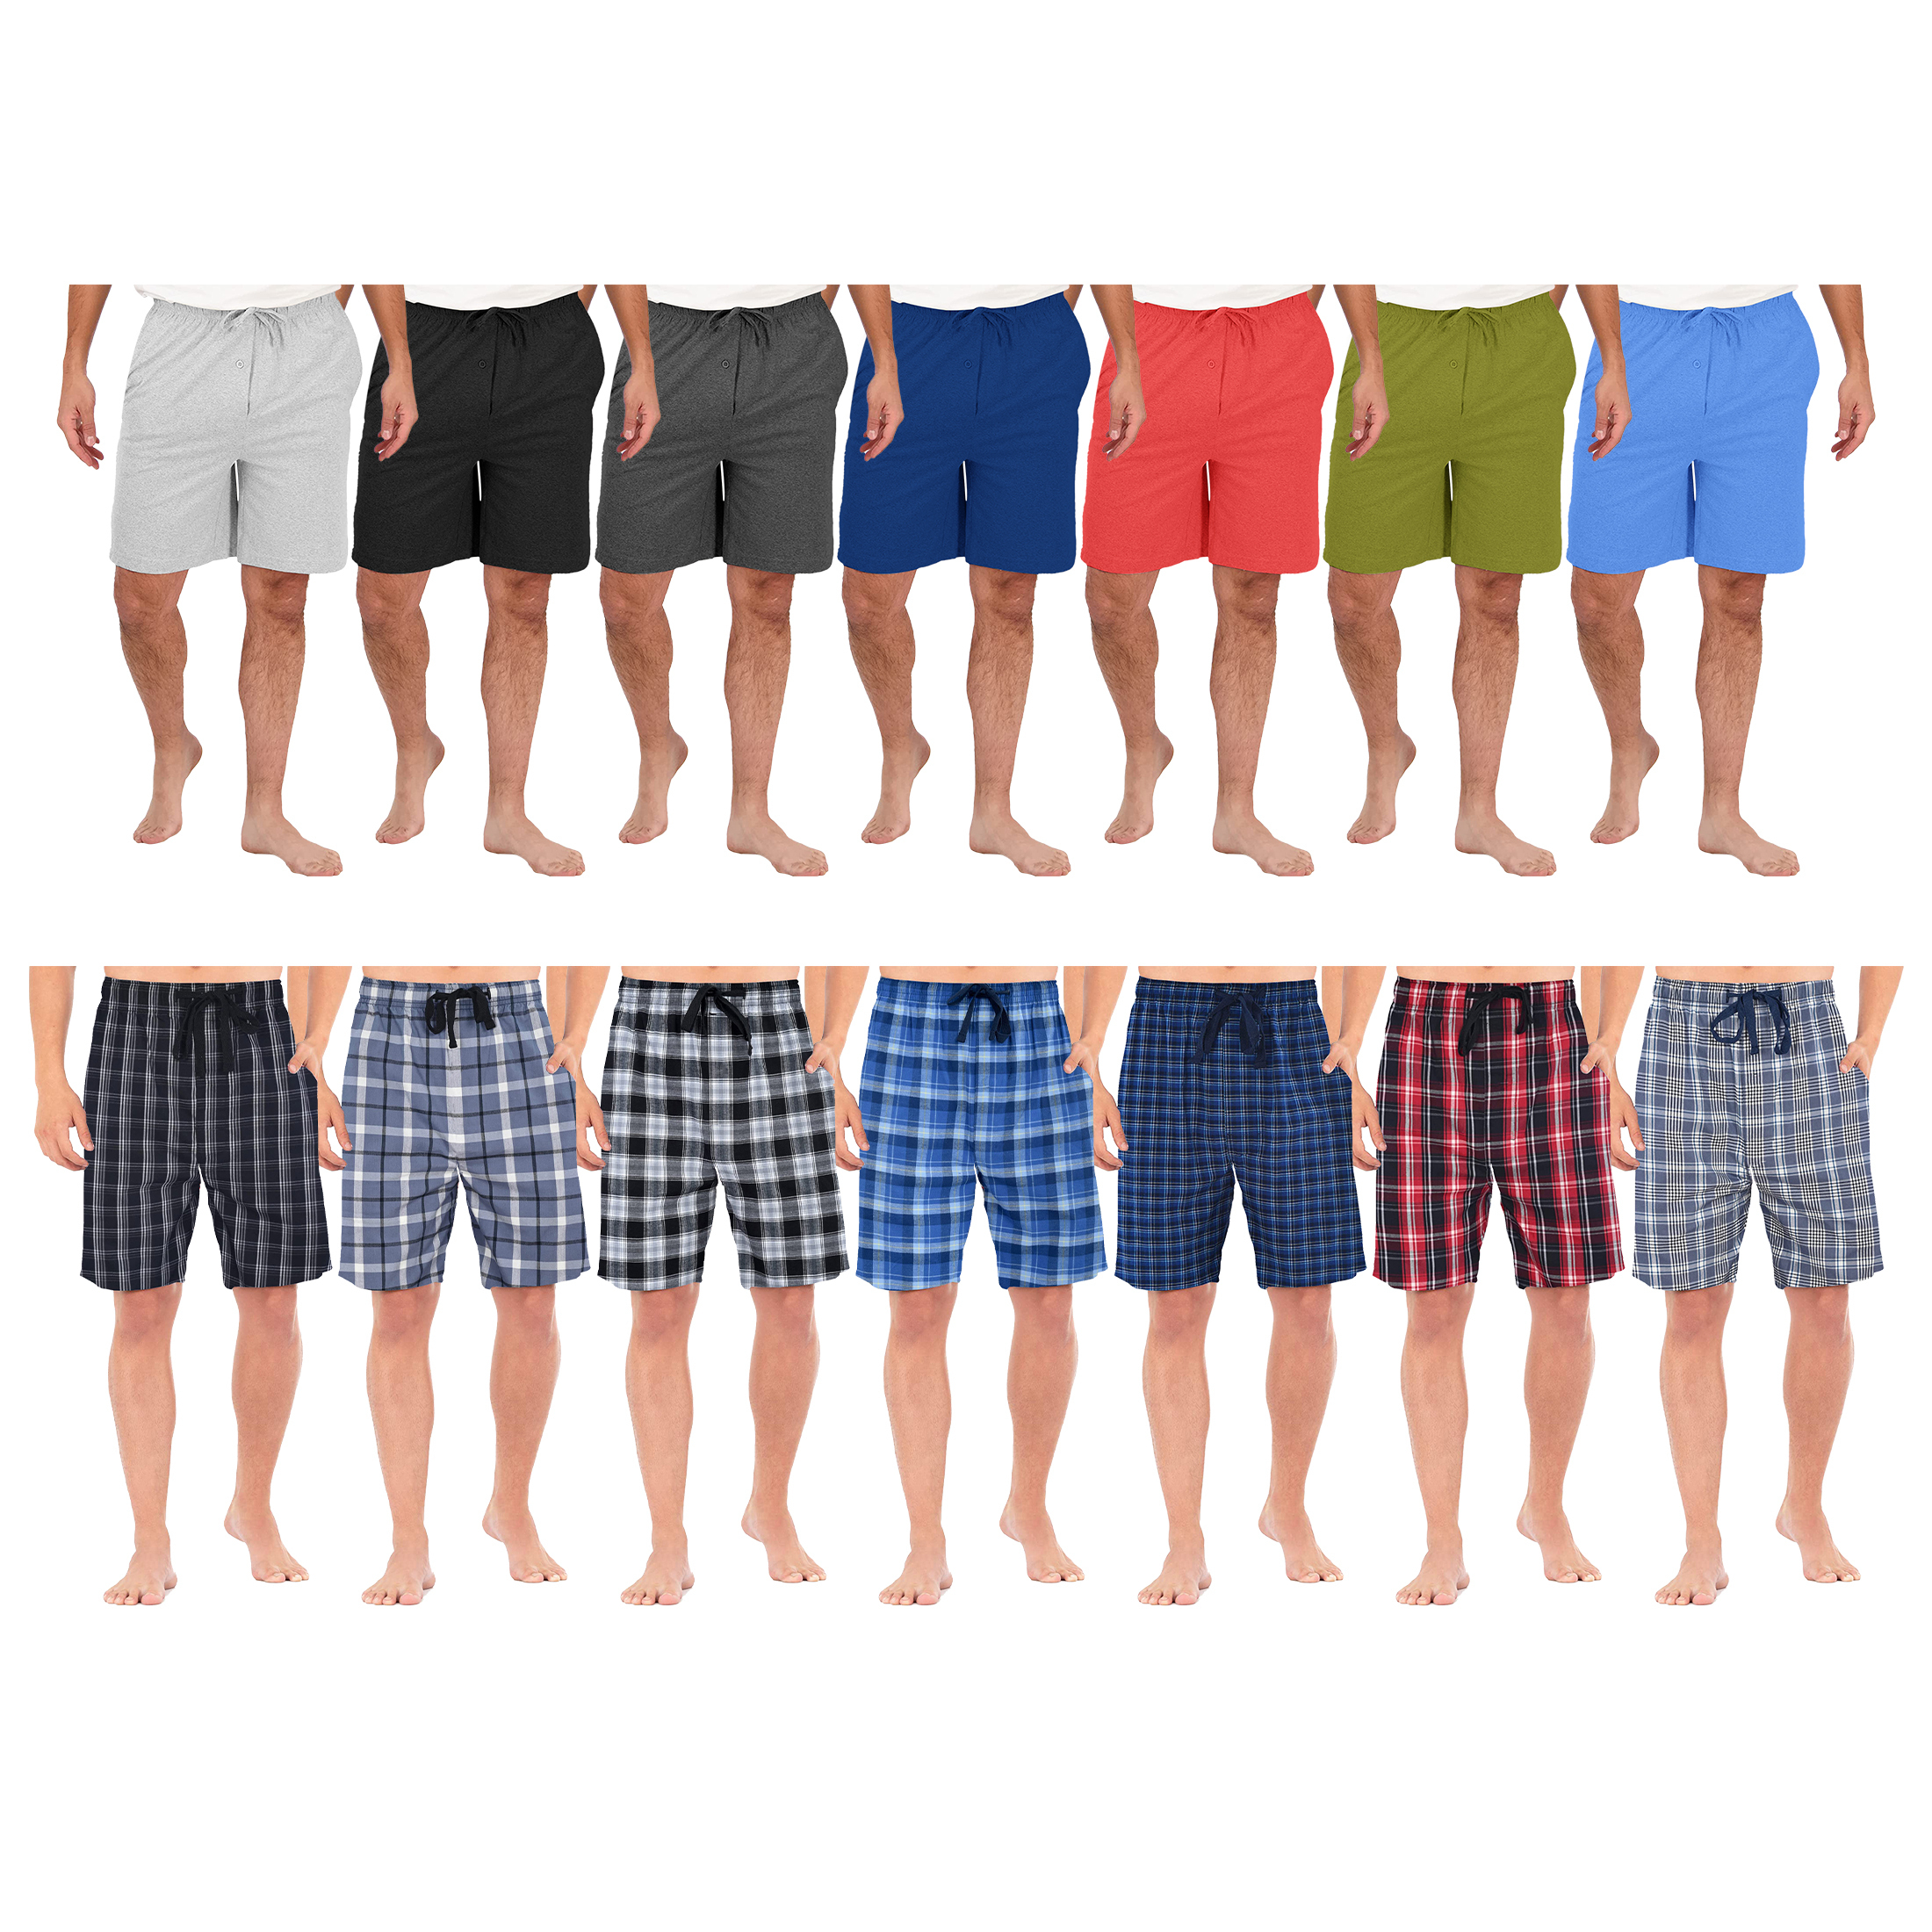 Multi-Pack: Men's Ultra-Soft Jersey Knit Sleep Lounge Pajama Shorts For Sleepwear - Solid & Plaid, 3 Pack, X-Large